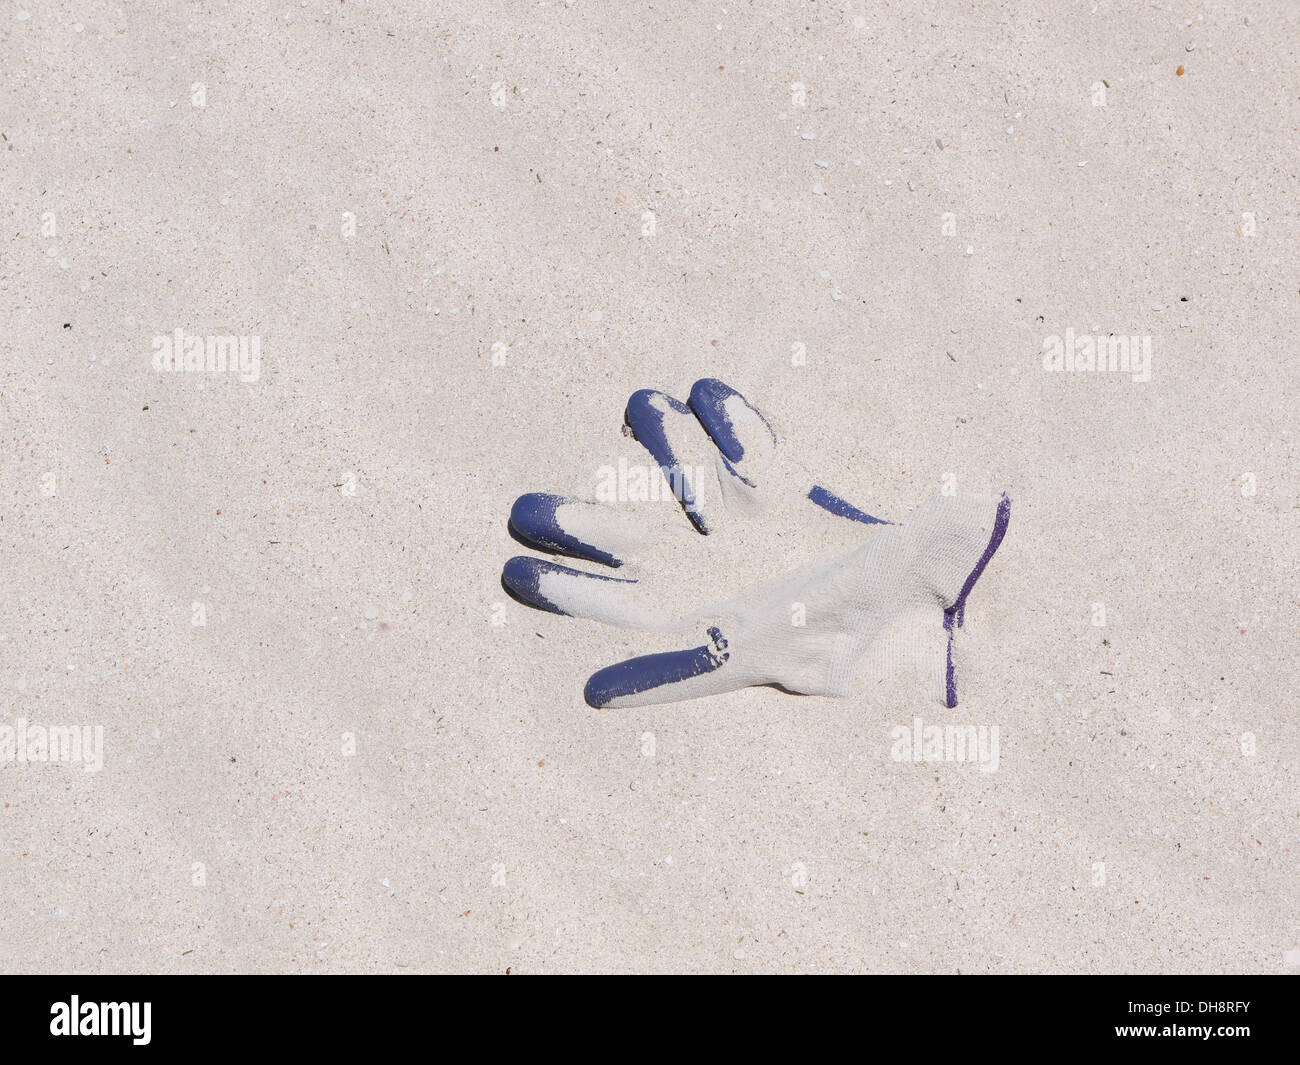 Lost glove partially covered in sand on a beach Stock Photo